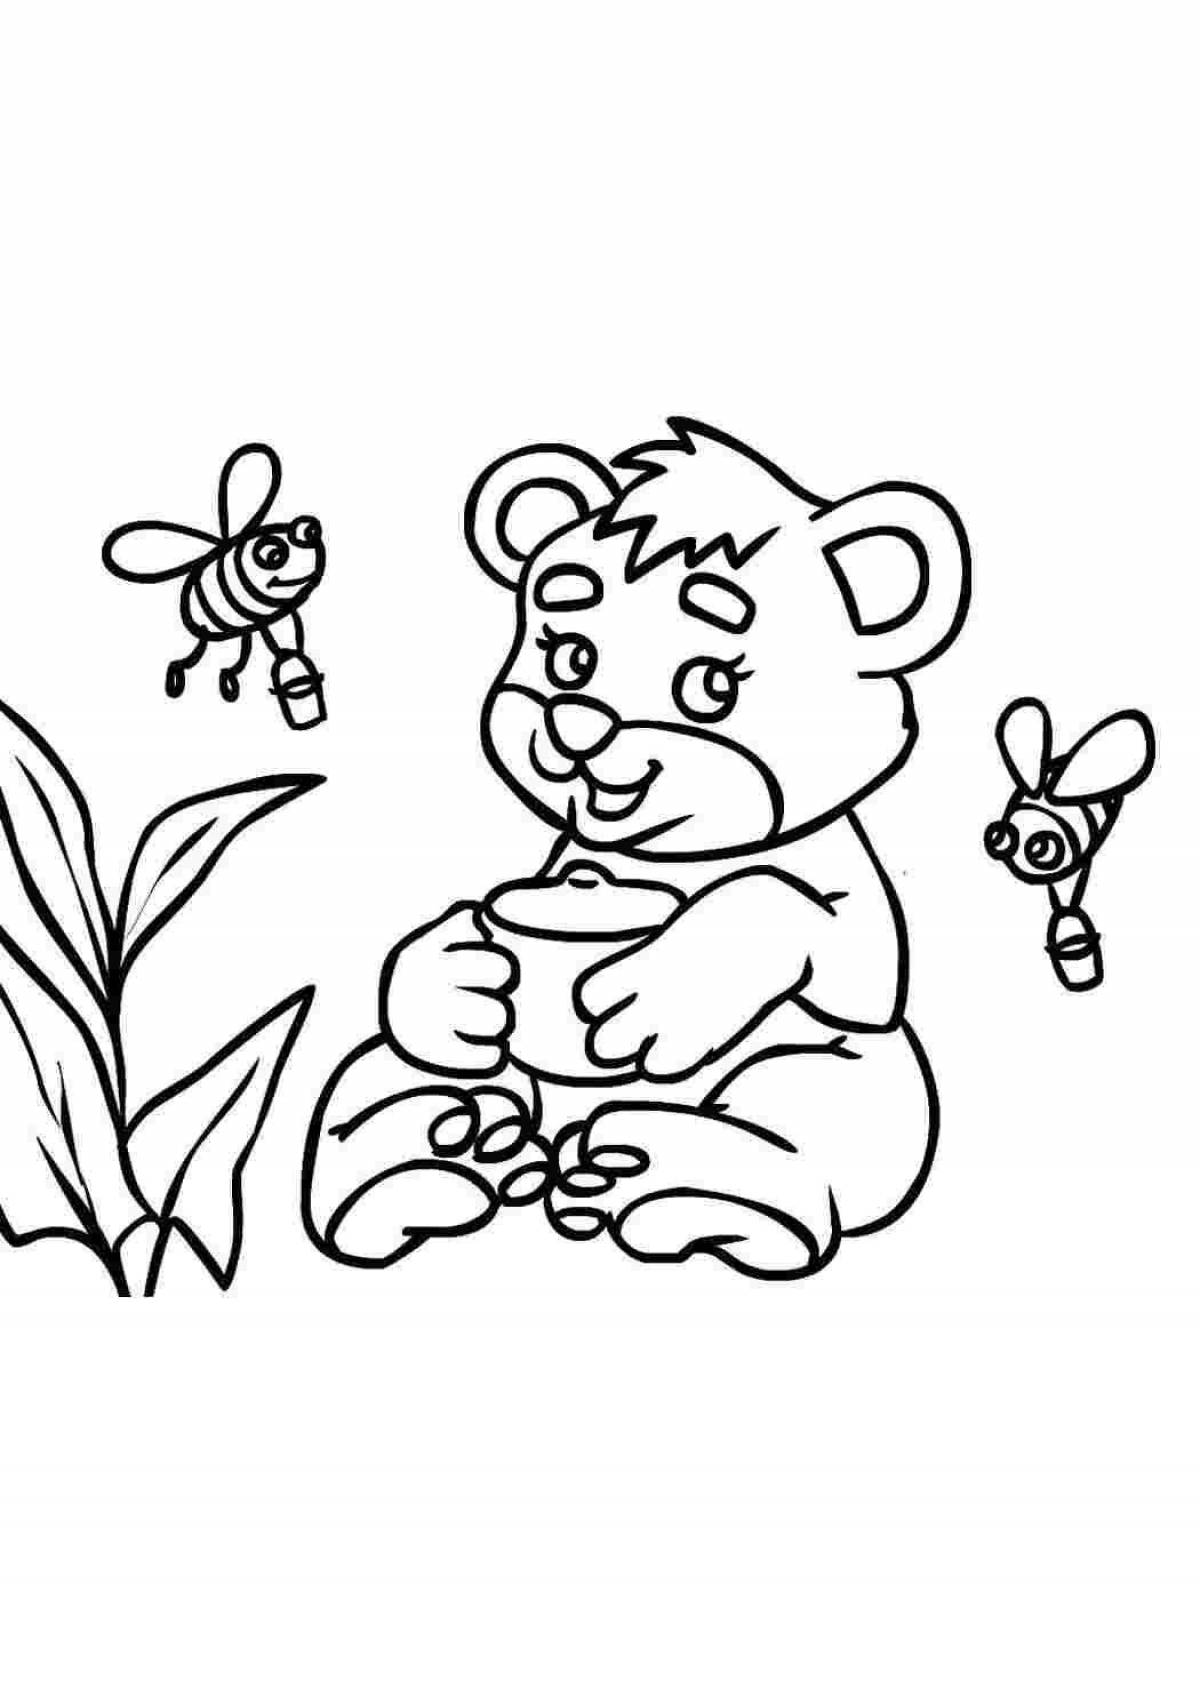 Merry bear with honey coloring book